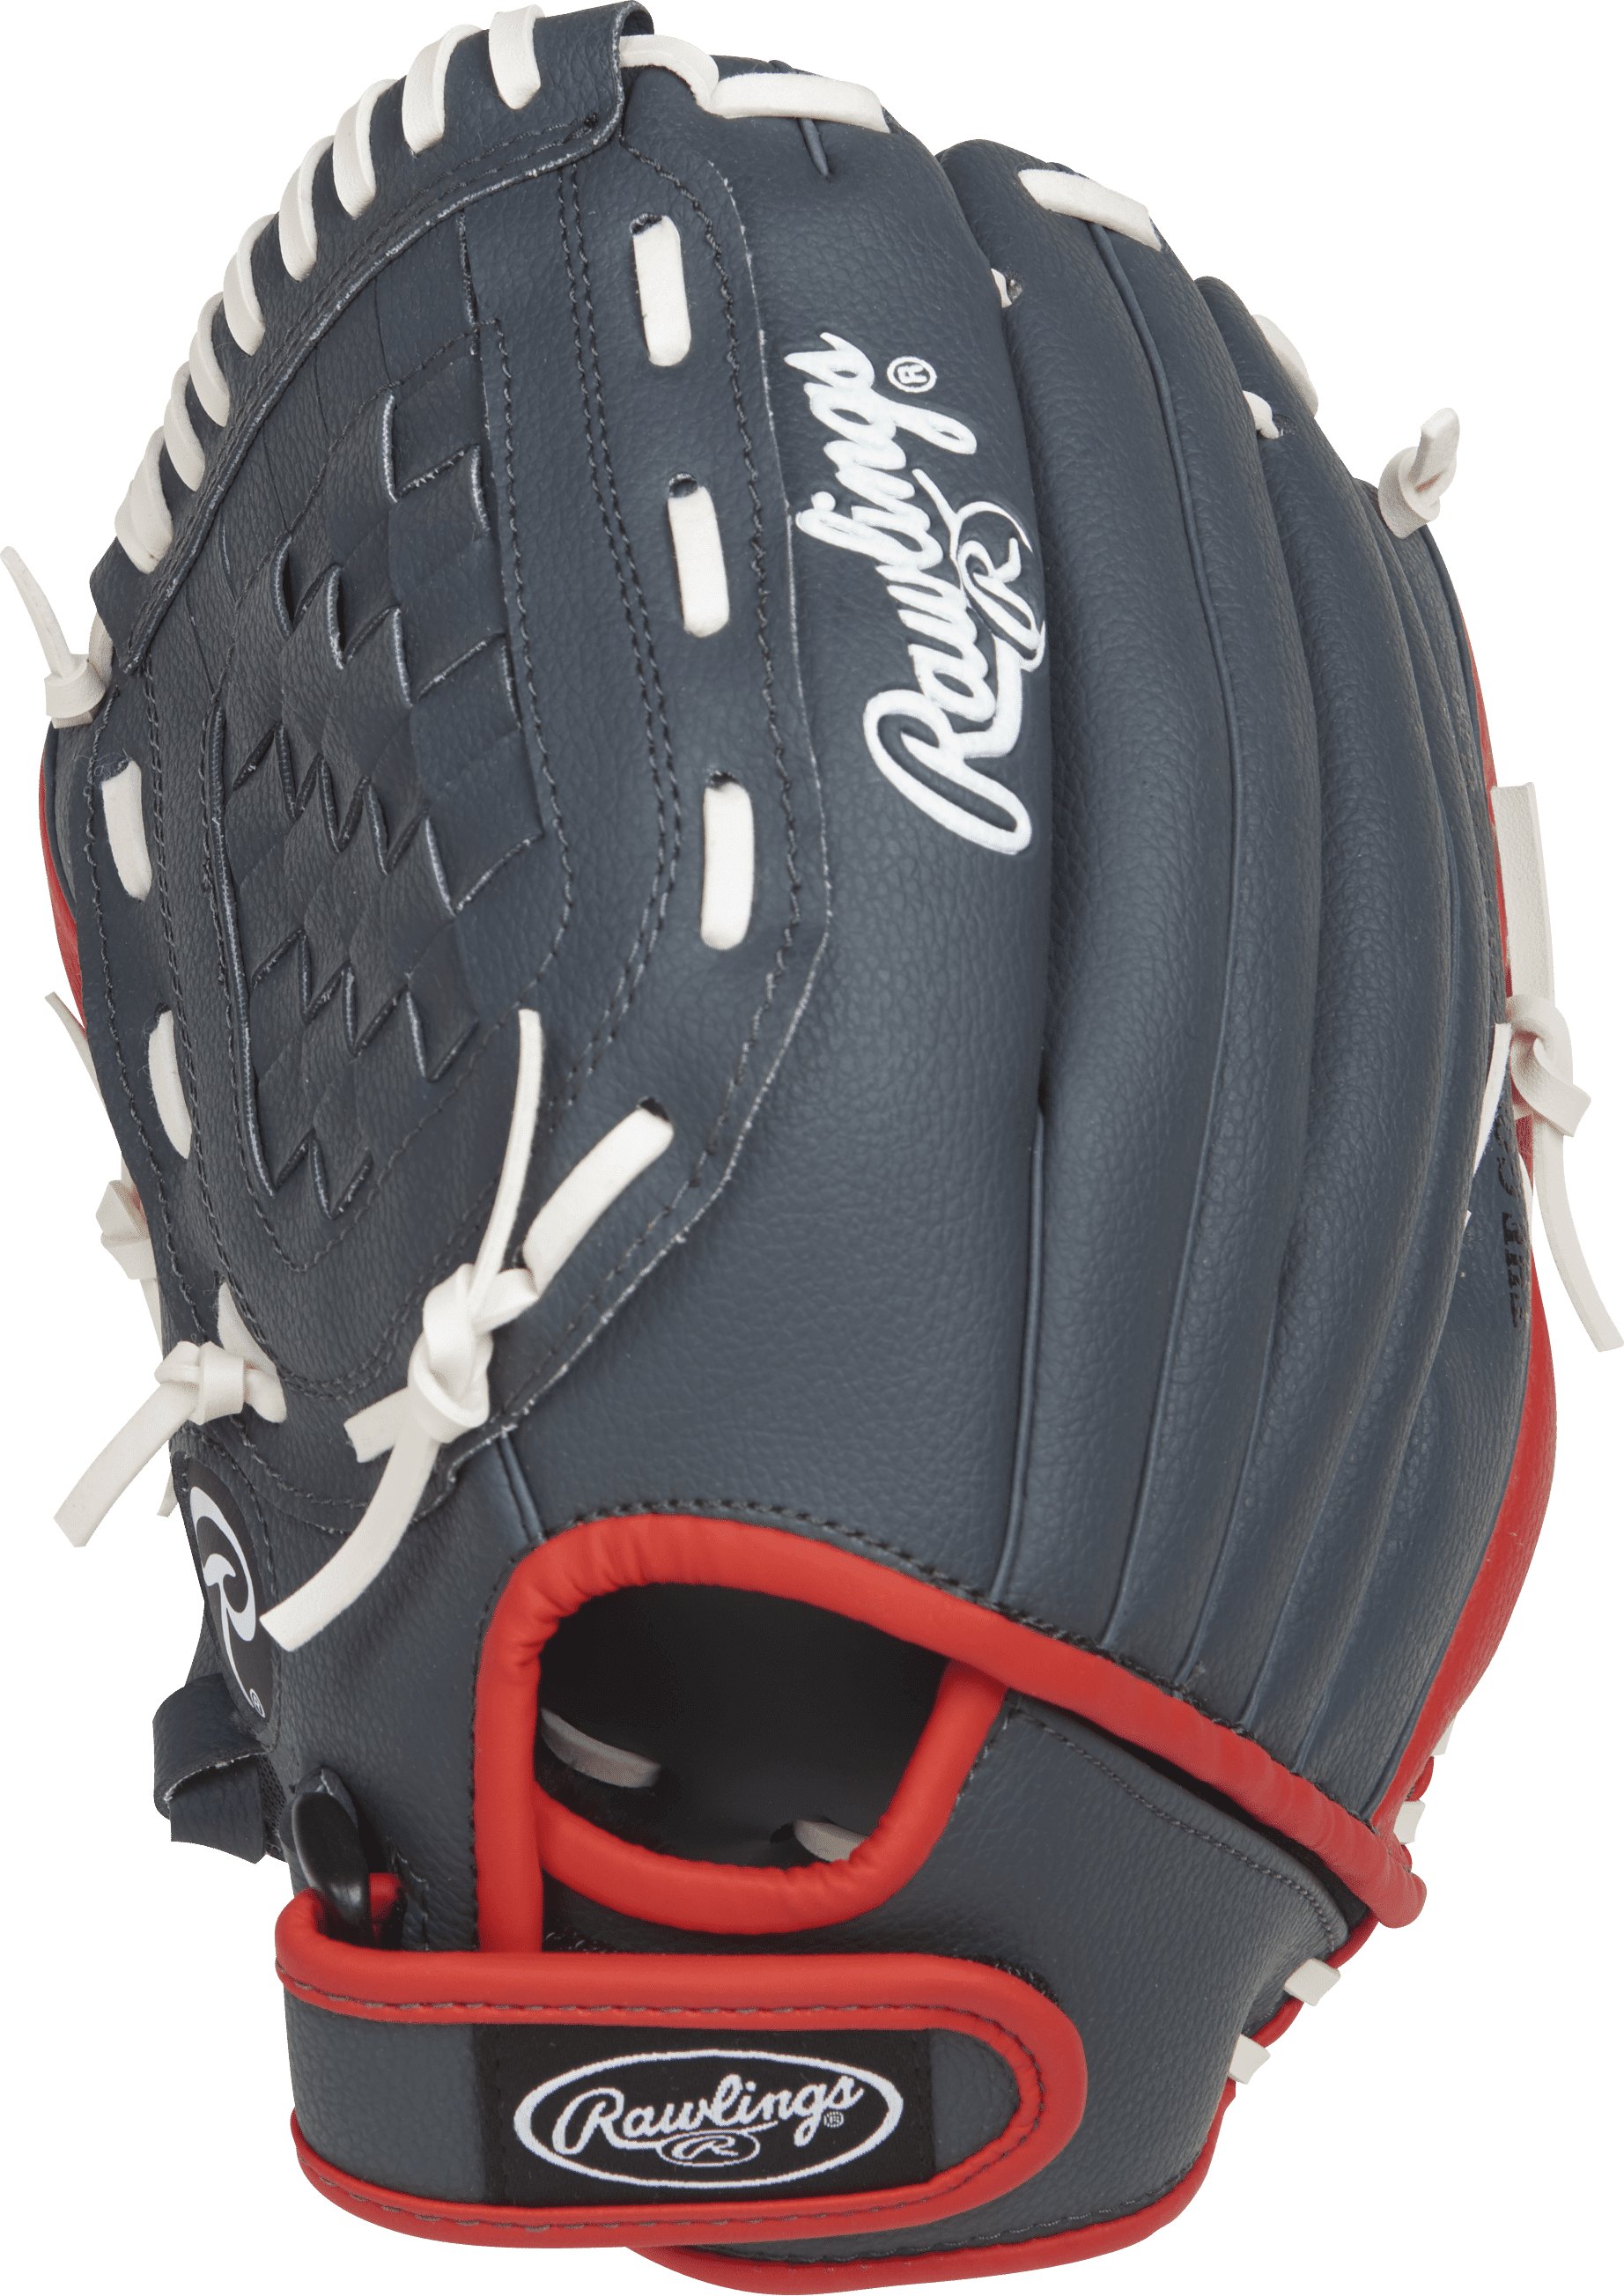 Rawlings Youth Kids 11.5 Inch Baseball Left Handed Glove Lefty PL115G Nice New 